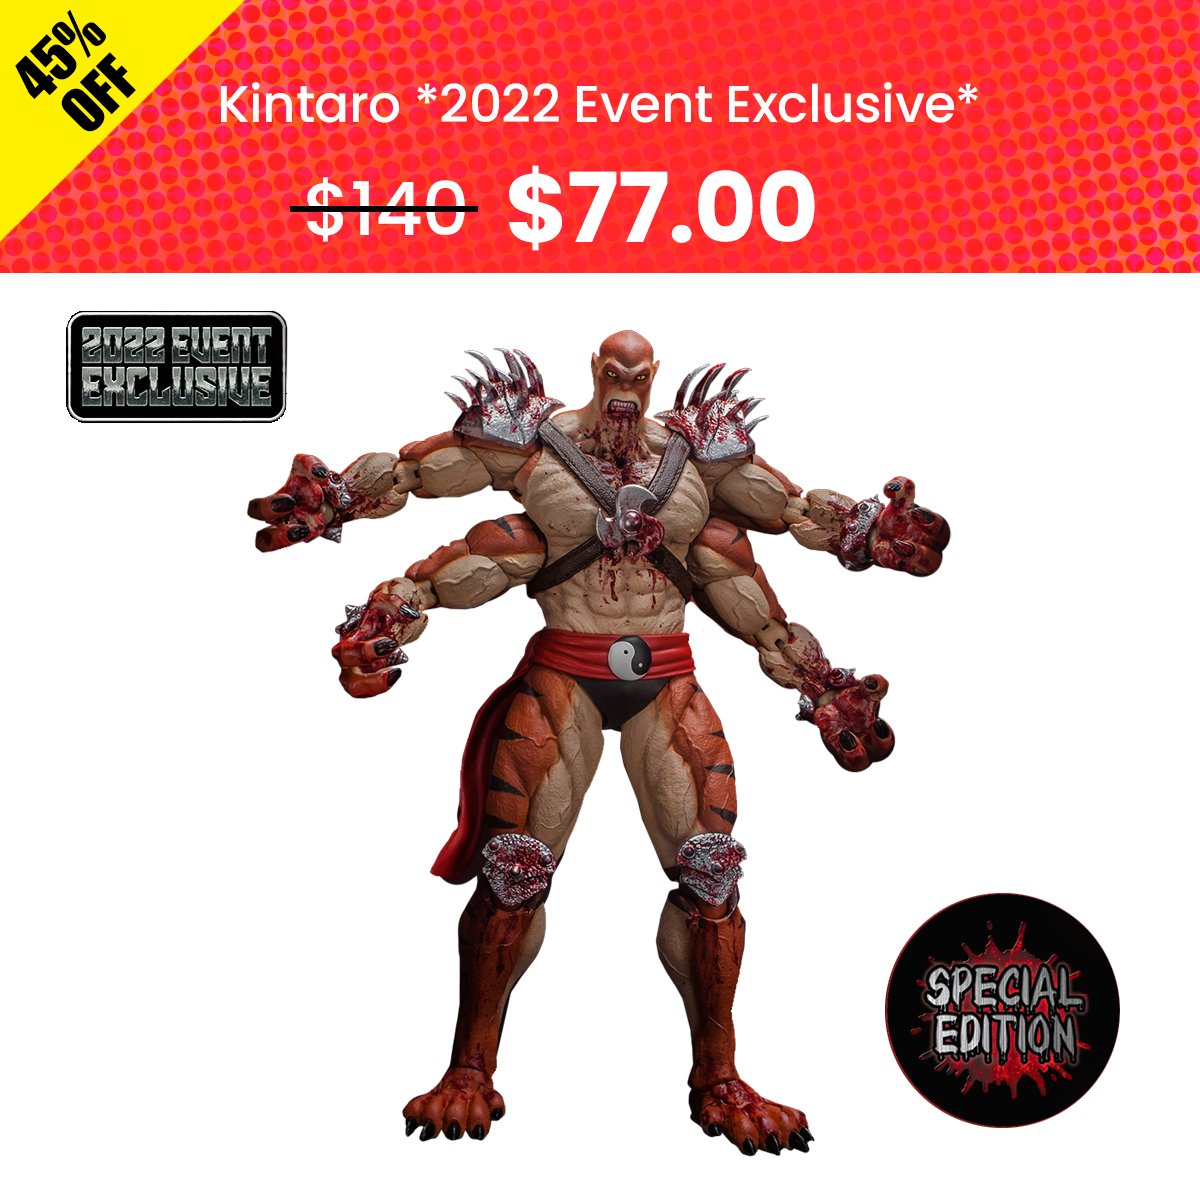 ICYMI: Our Black Friday Sale is going on right now! Save big of select Storm Collectibles Action Figures like Reptile and Kintaro from the #MortalKombat series. Order yours today. ▶️shop.bandai.com/blackfriday.ht…